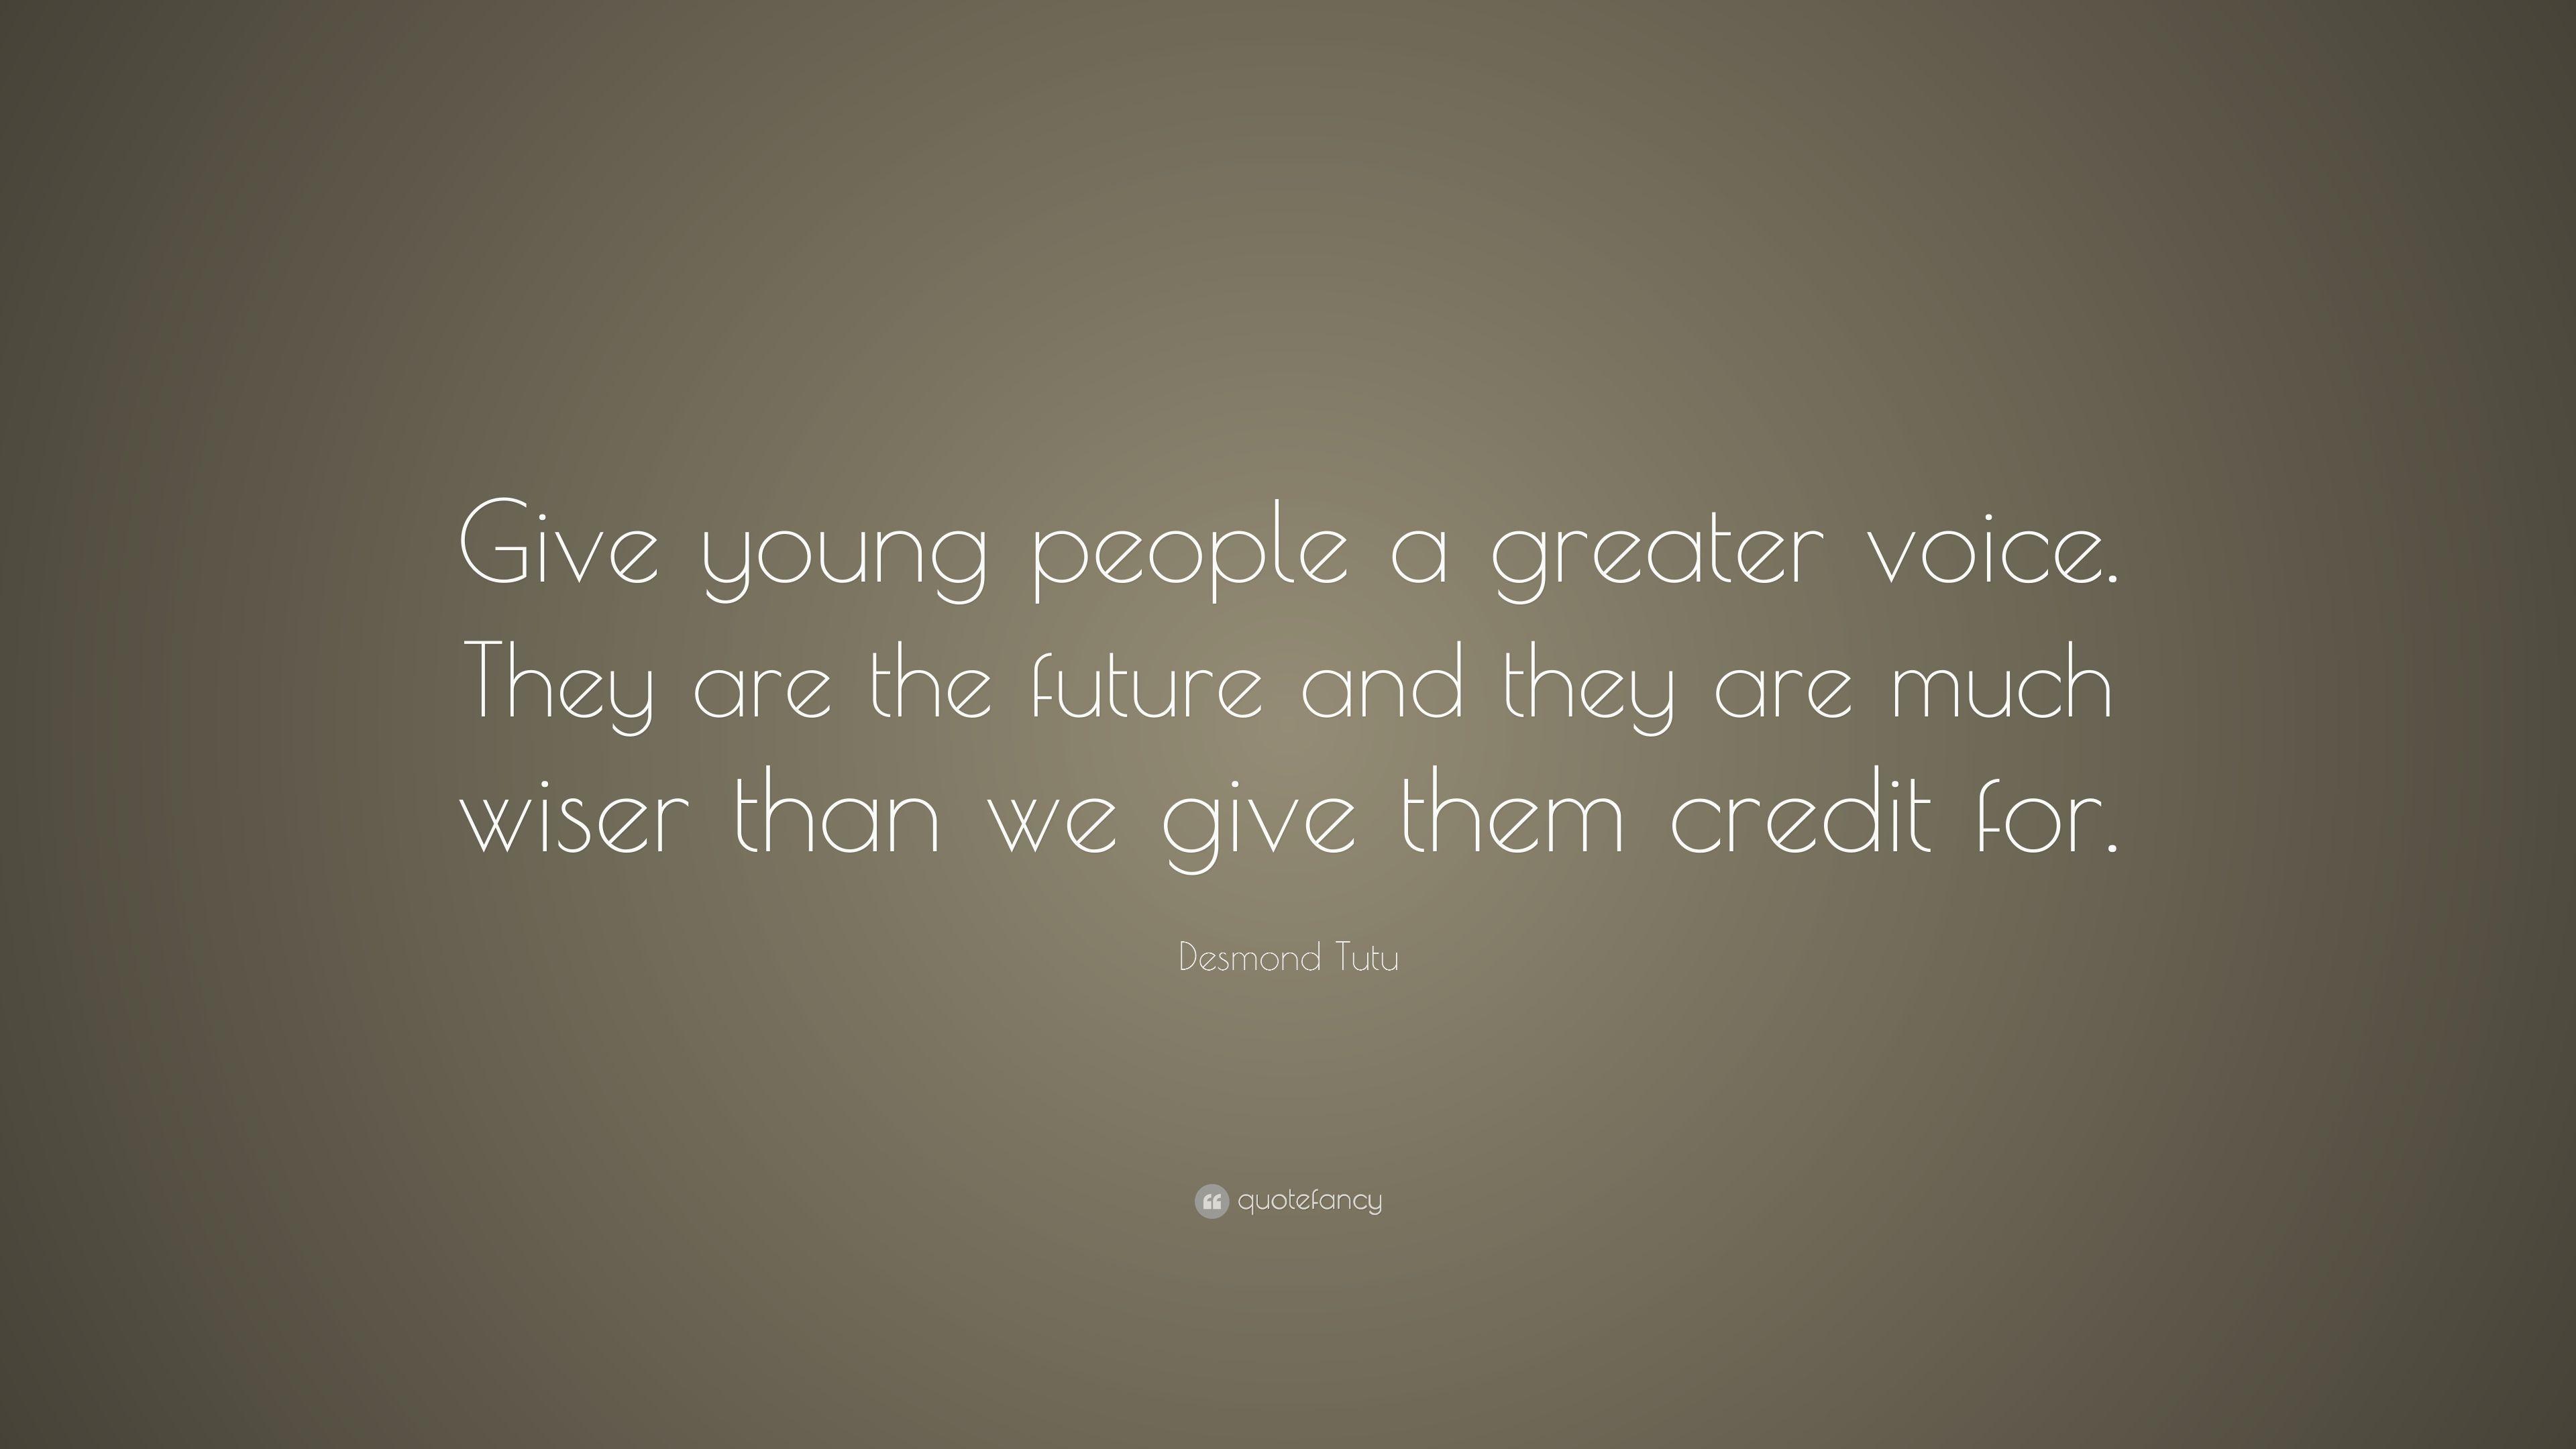 Desmond Tutu Quote: “Give young people a greater voice. They are